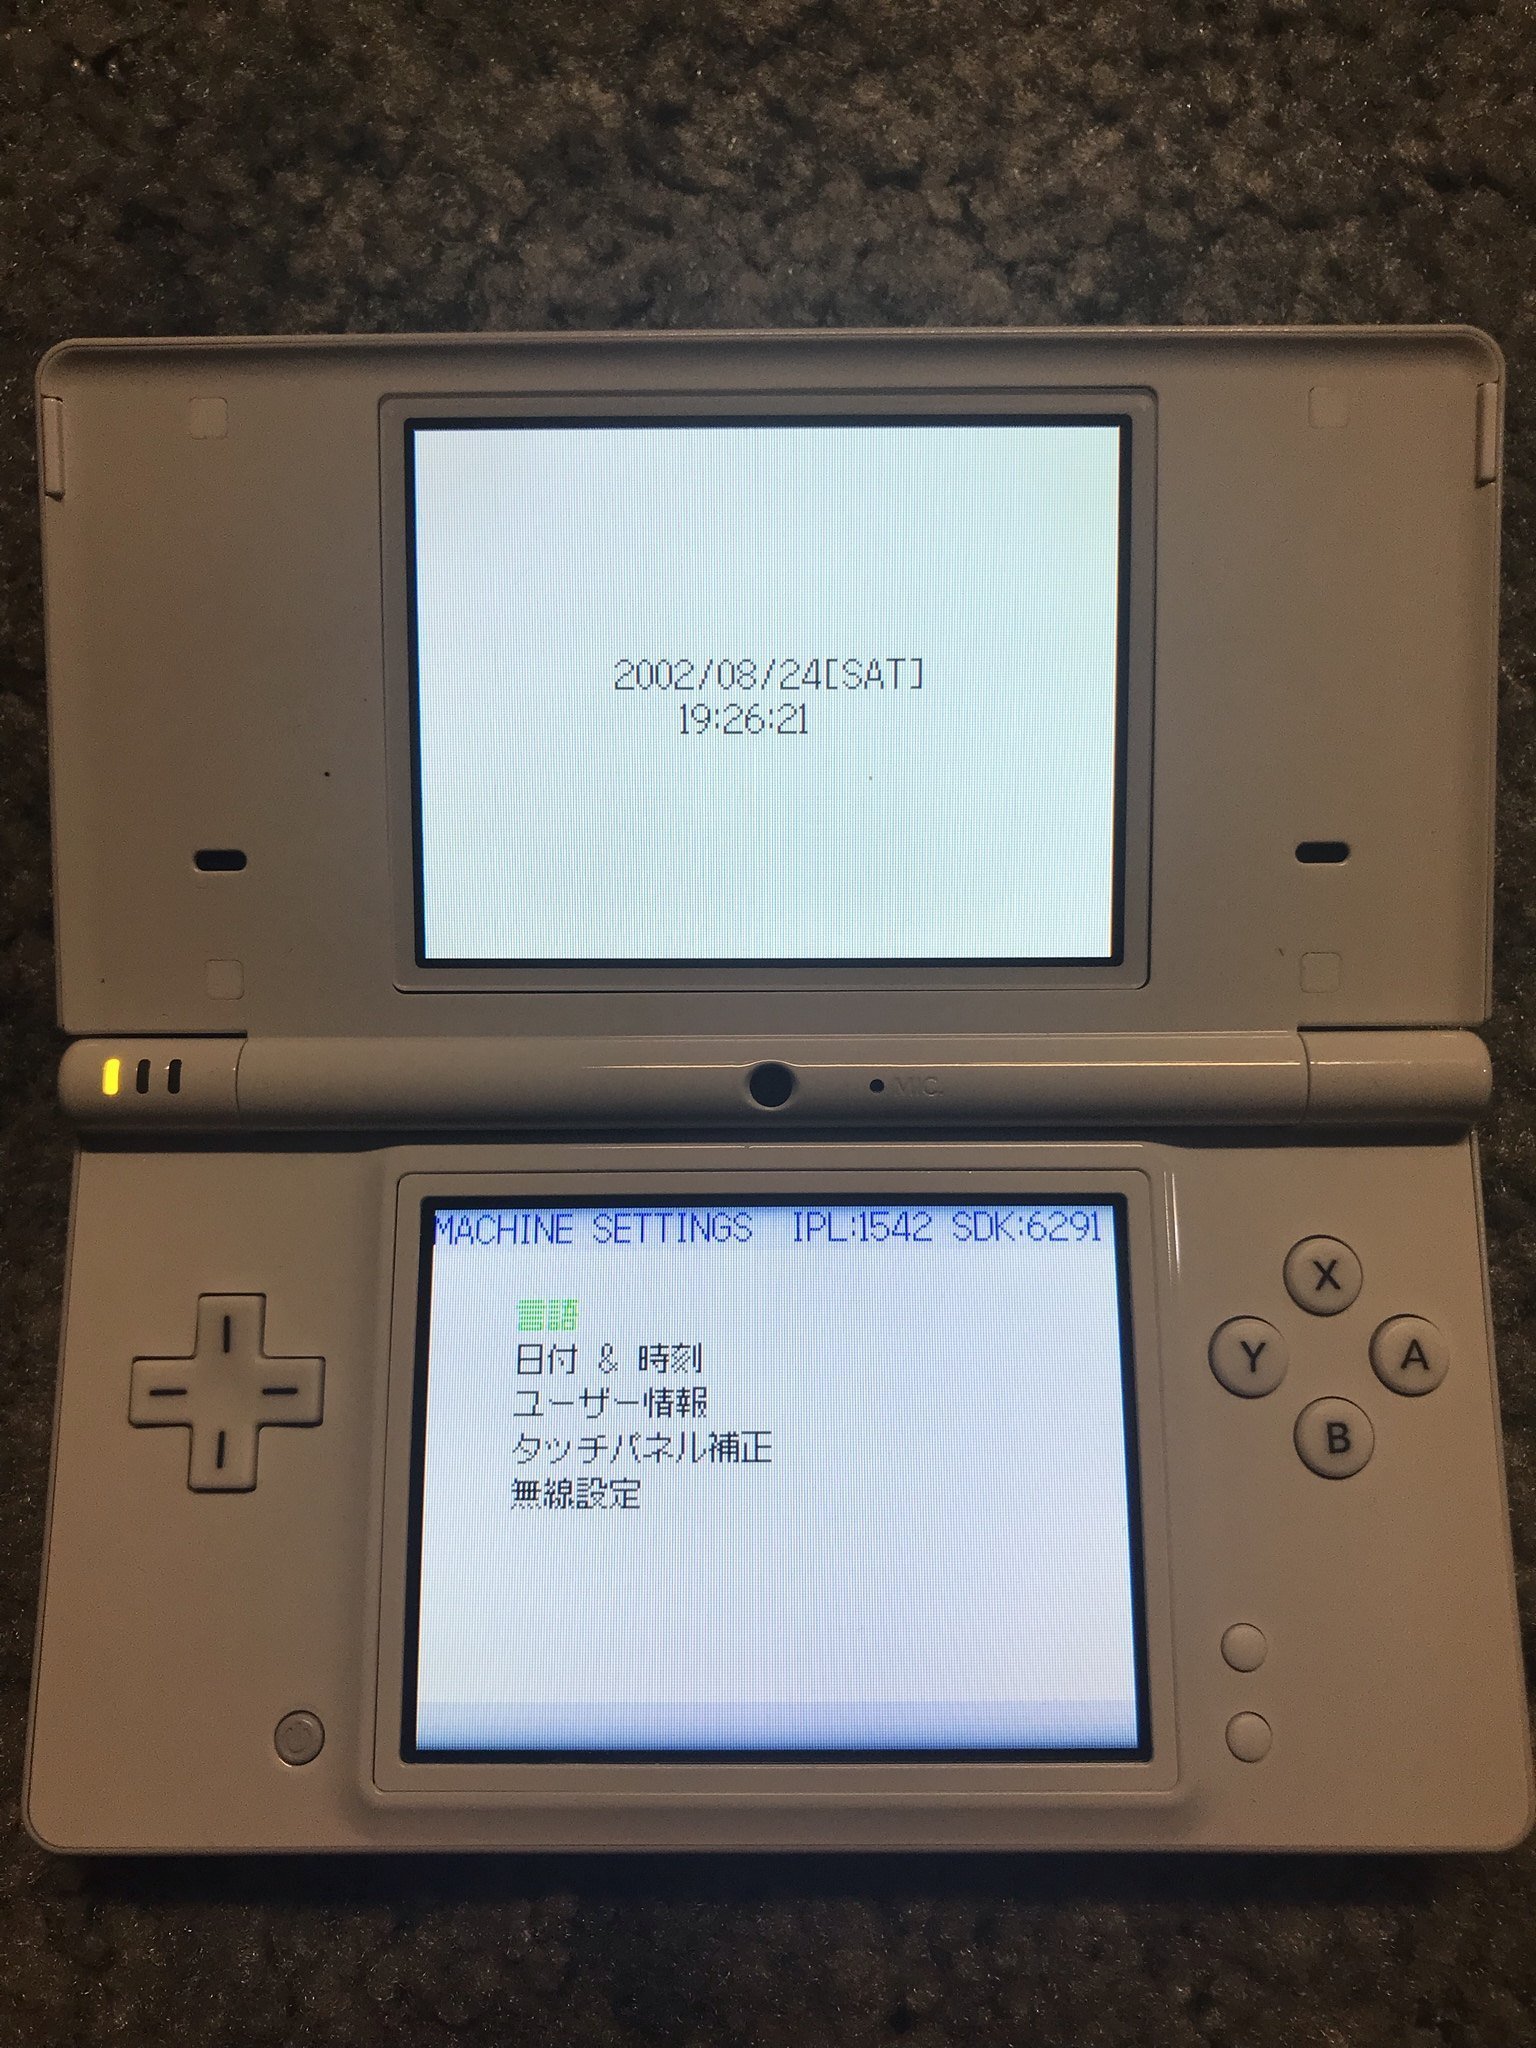 Nintendo cuts forecasts, plans to introduce new version of DSi handheld